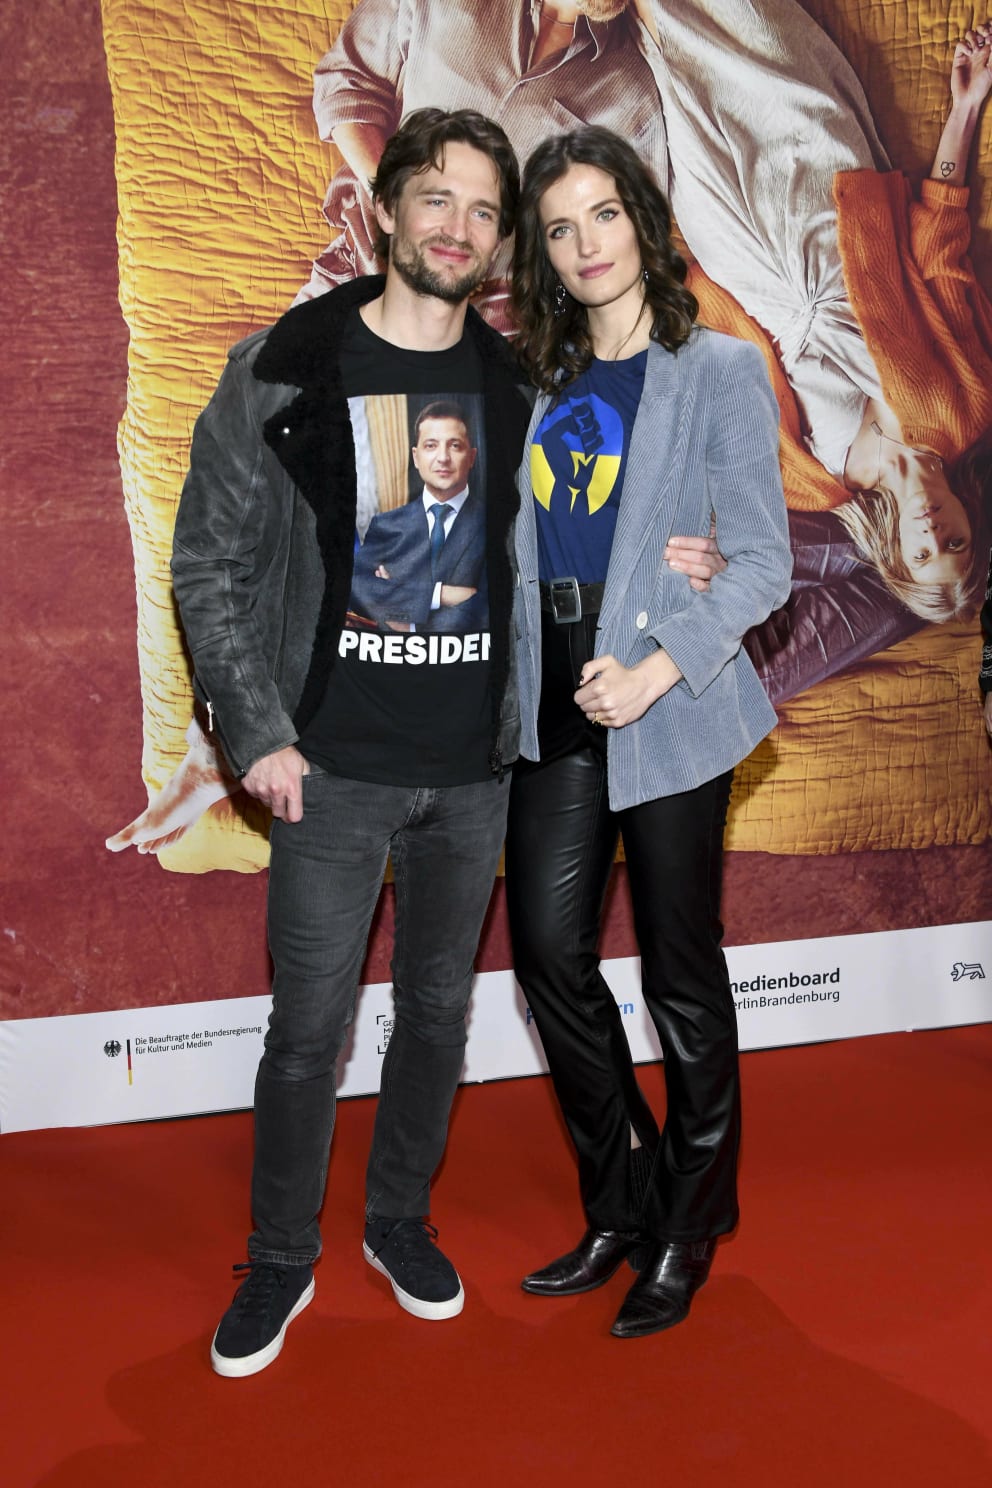 Such a beautiful couple: August Wittgenstein and Mia Rohla at a series premiere in Berlin in early March